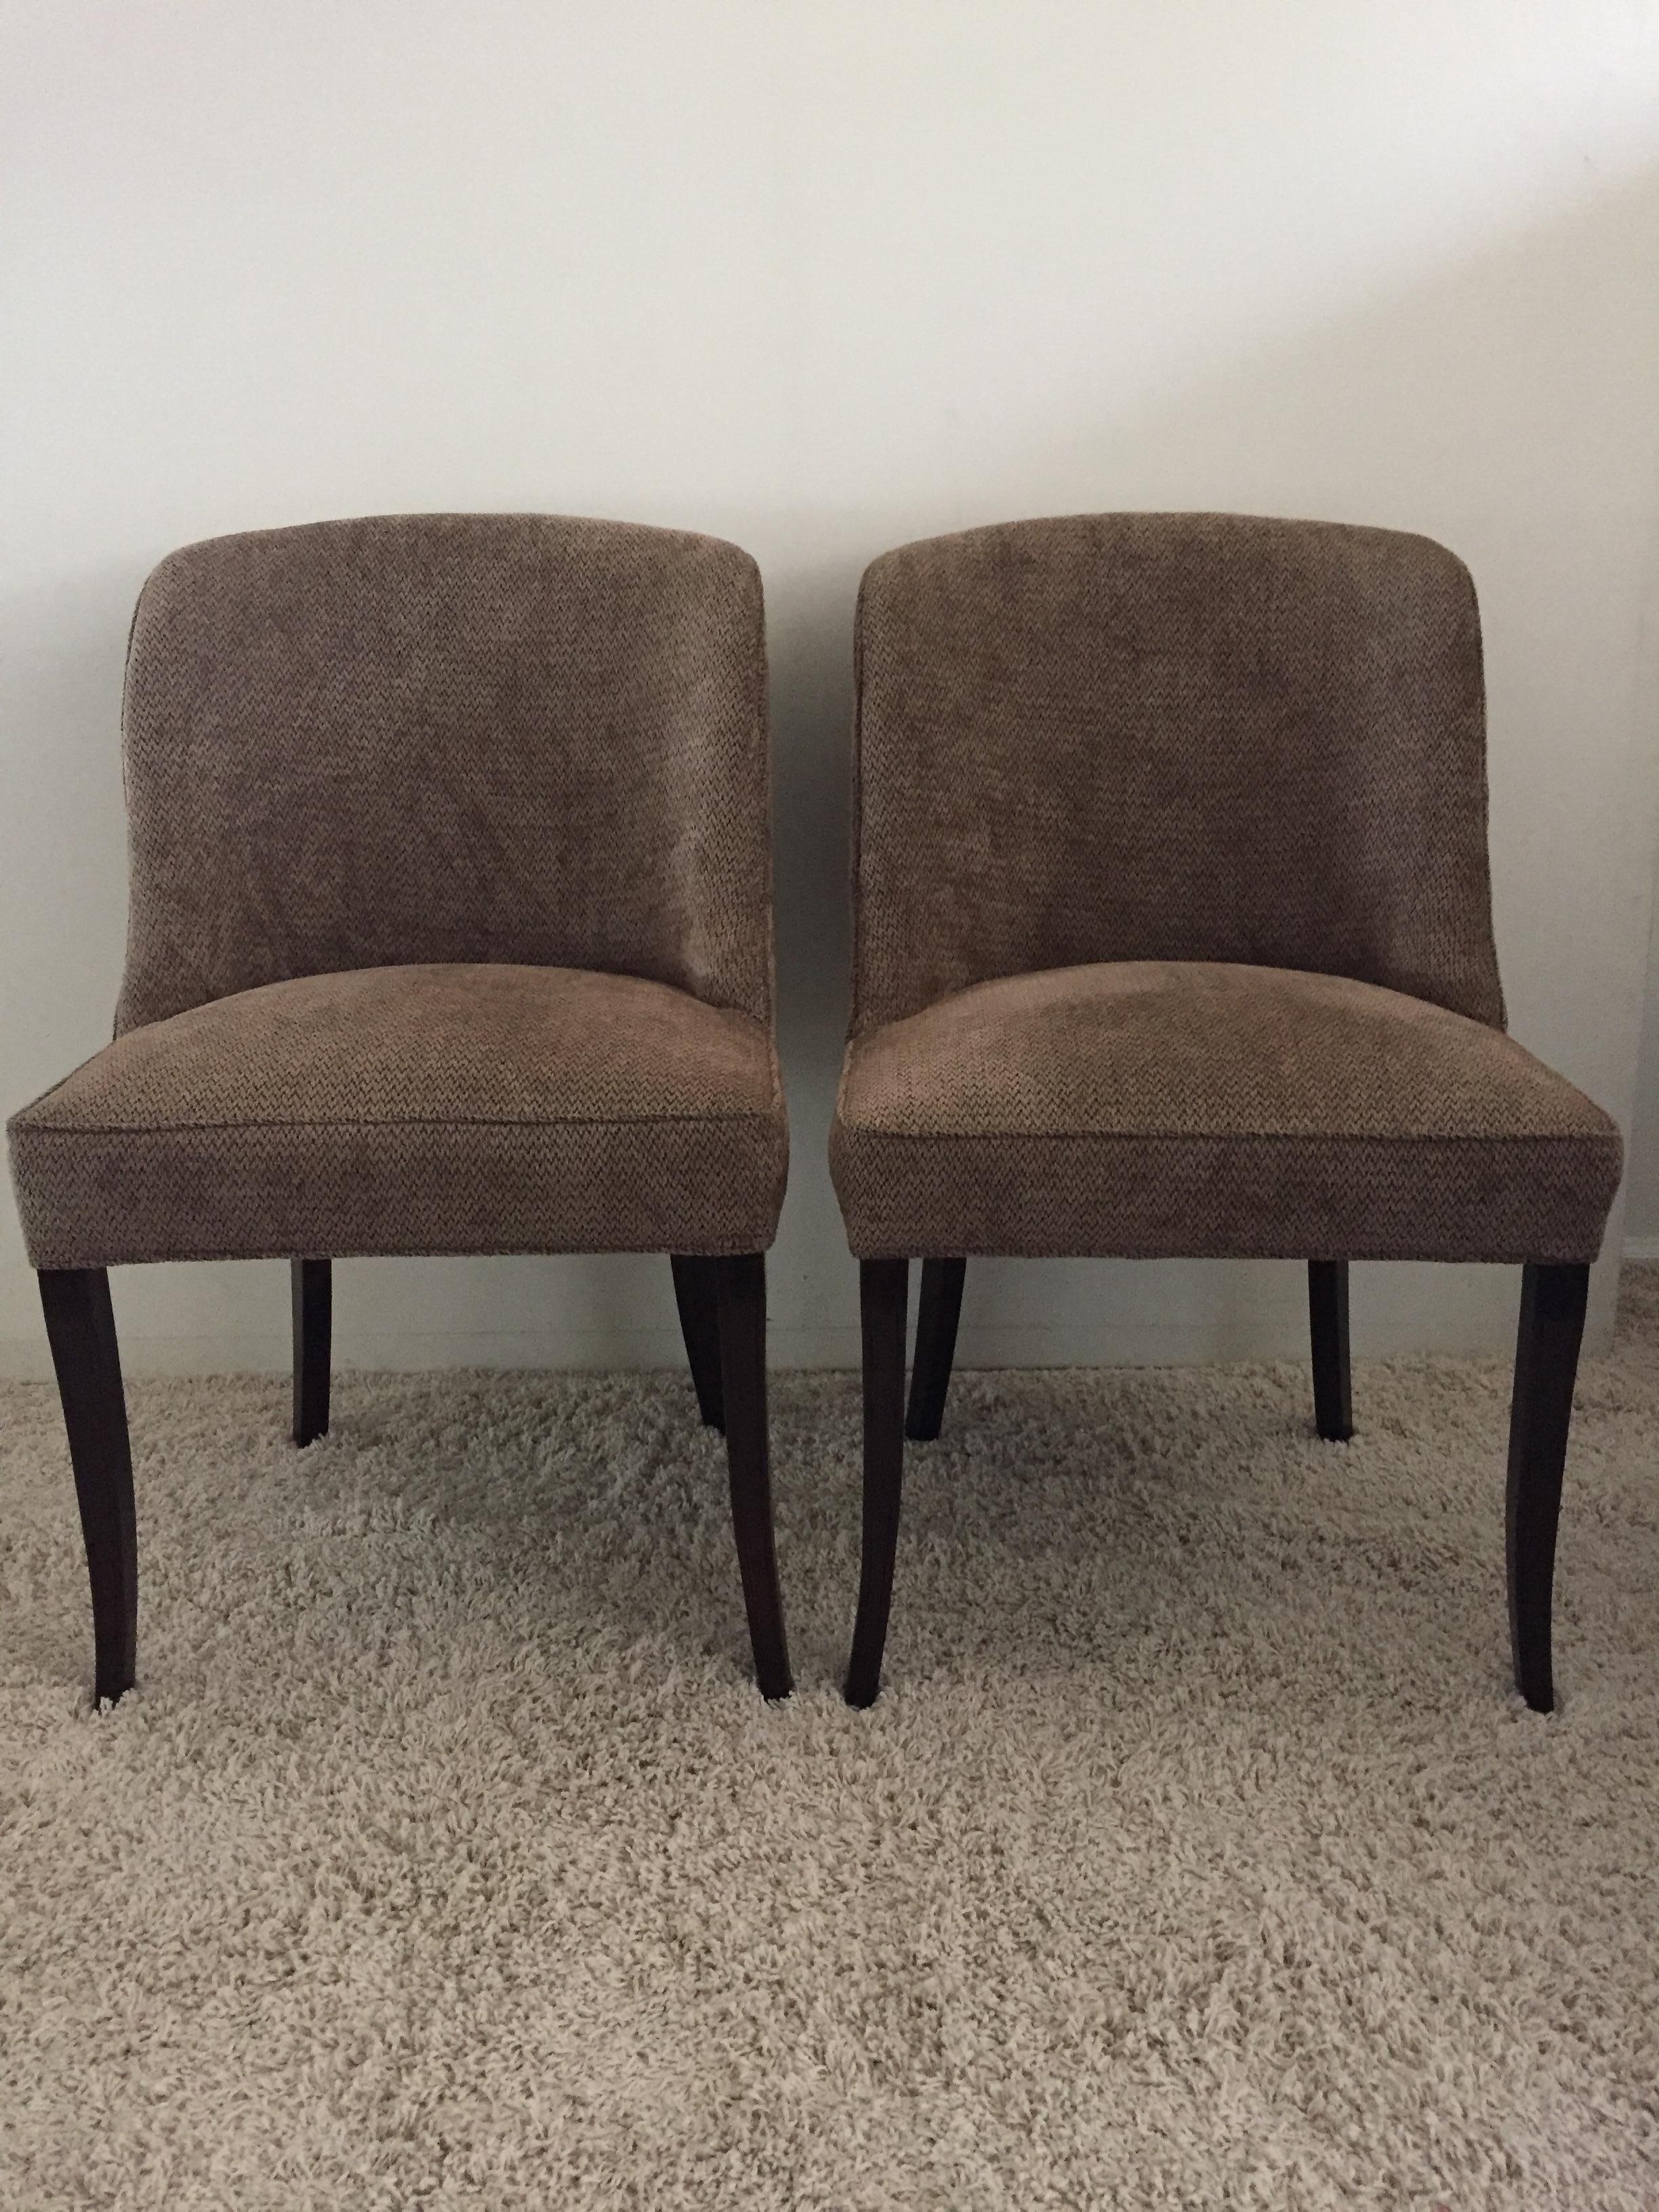 Pair of Tommi Parzinger for Charek modern side chairs/ captains dining chairs. Curved back and spring construction for comfort .